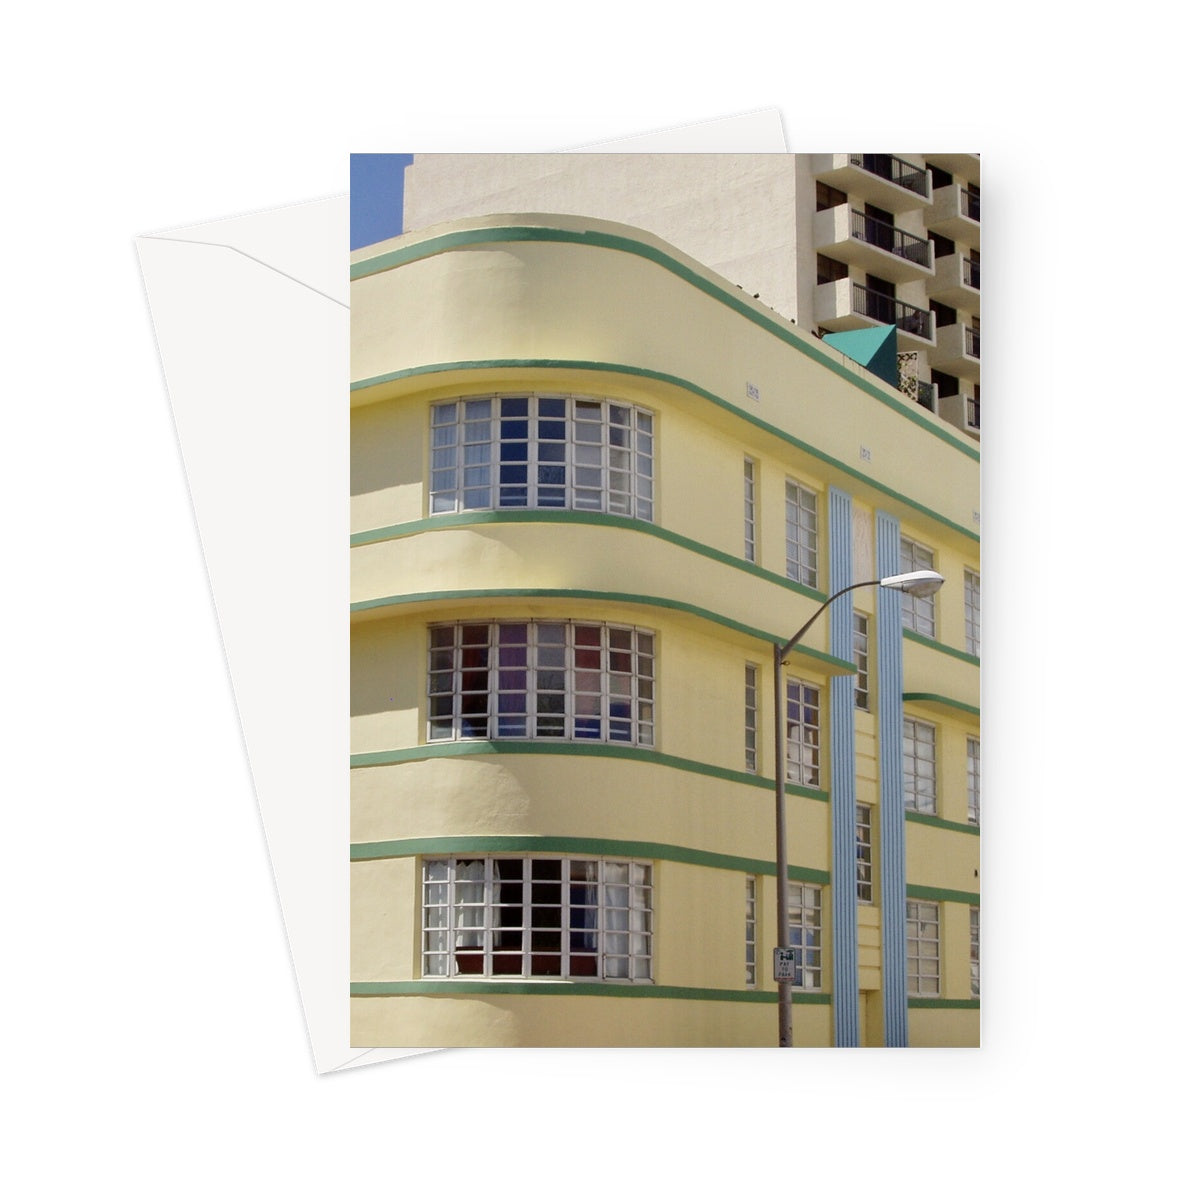 This greeting card shows the corner aspect of a yellow building with green striped edging and canopy, and blue striped column effects.